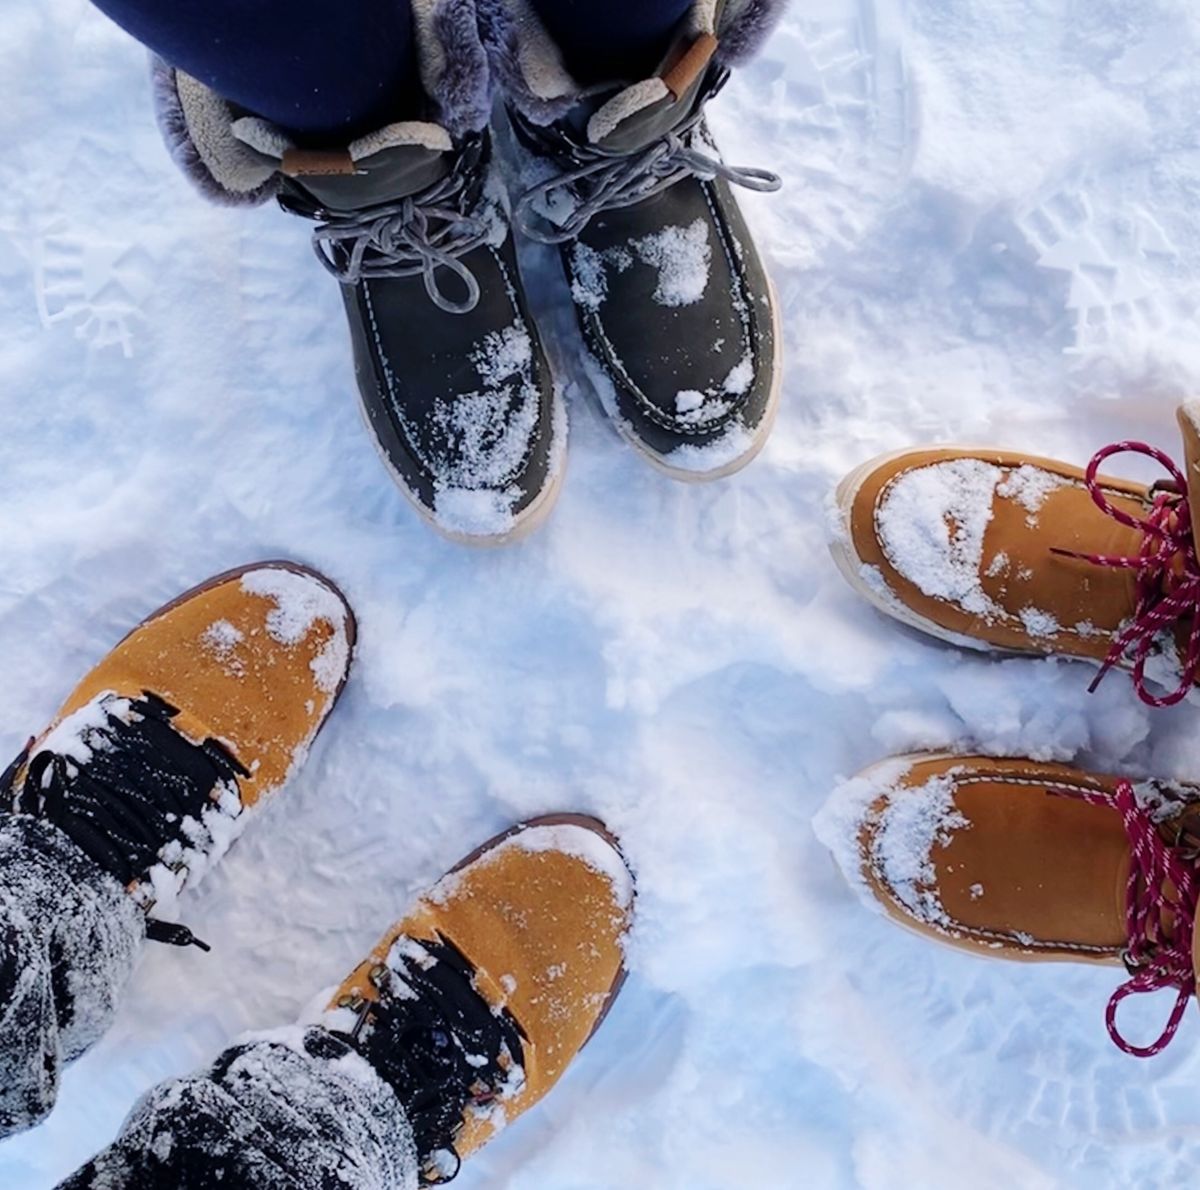 How To Make Shoes Non-Slip & Slip Resistant For Ice & Snow